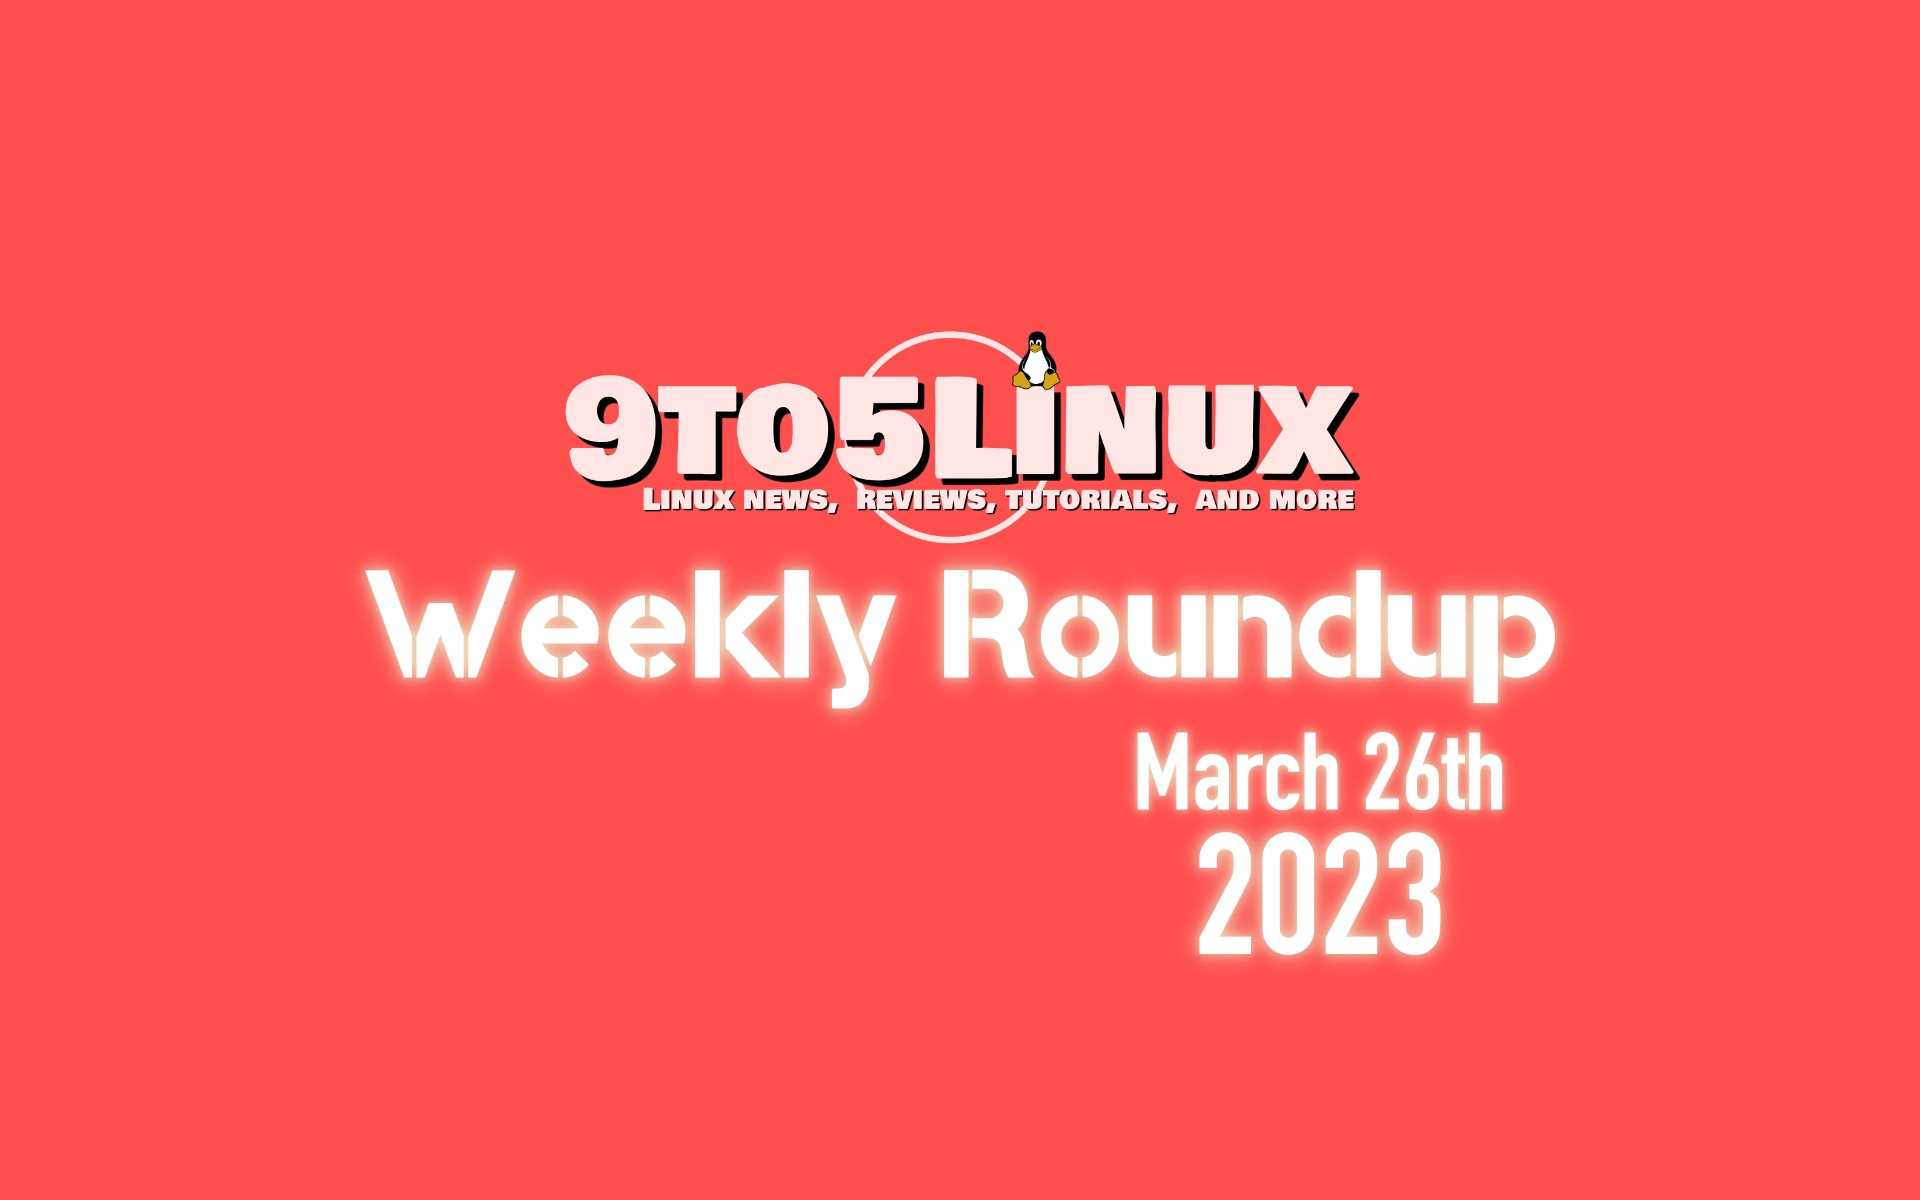 9to5Linux Weekly Roundup: March 26th, 2023